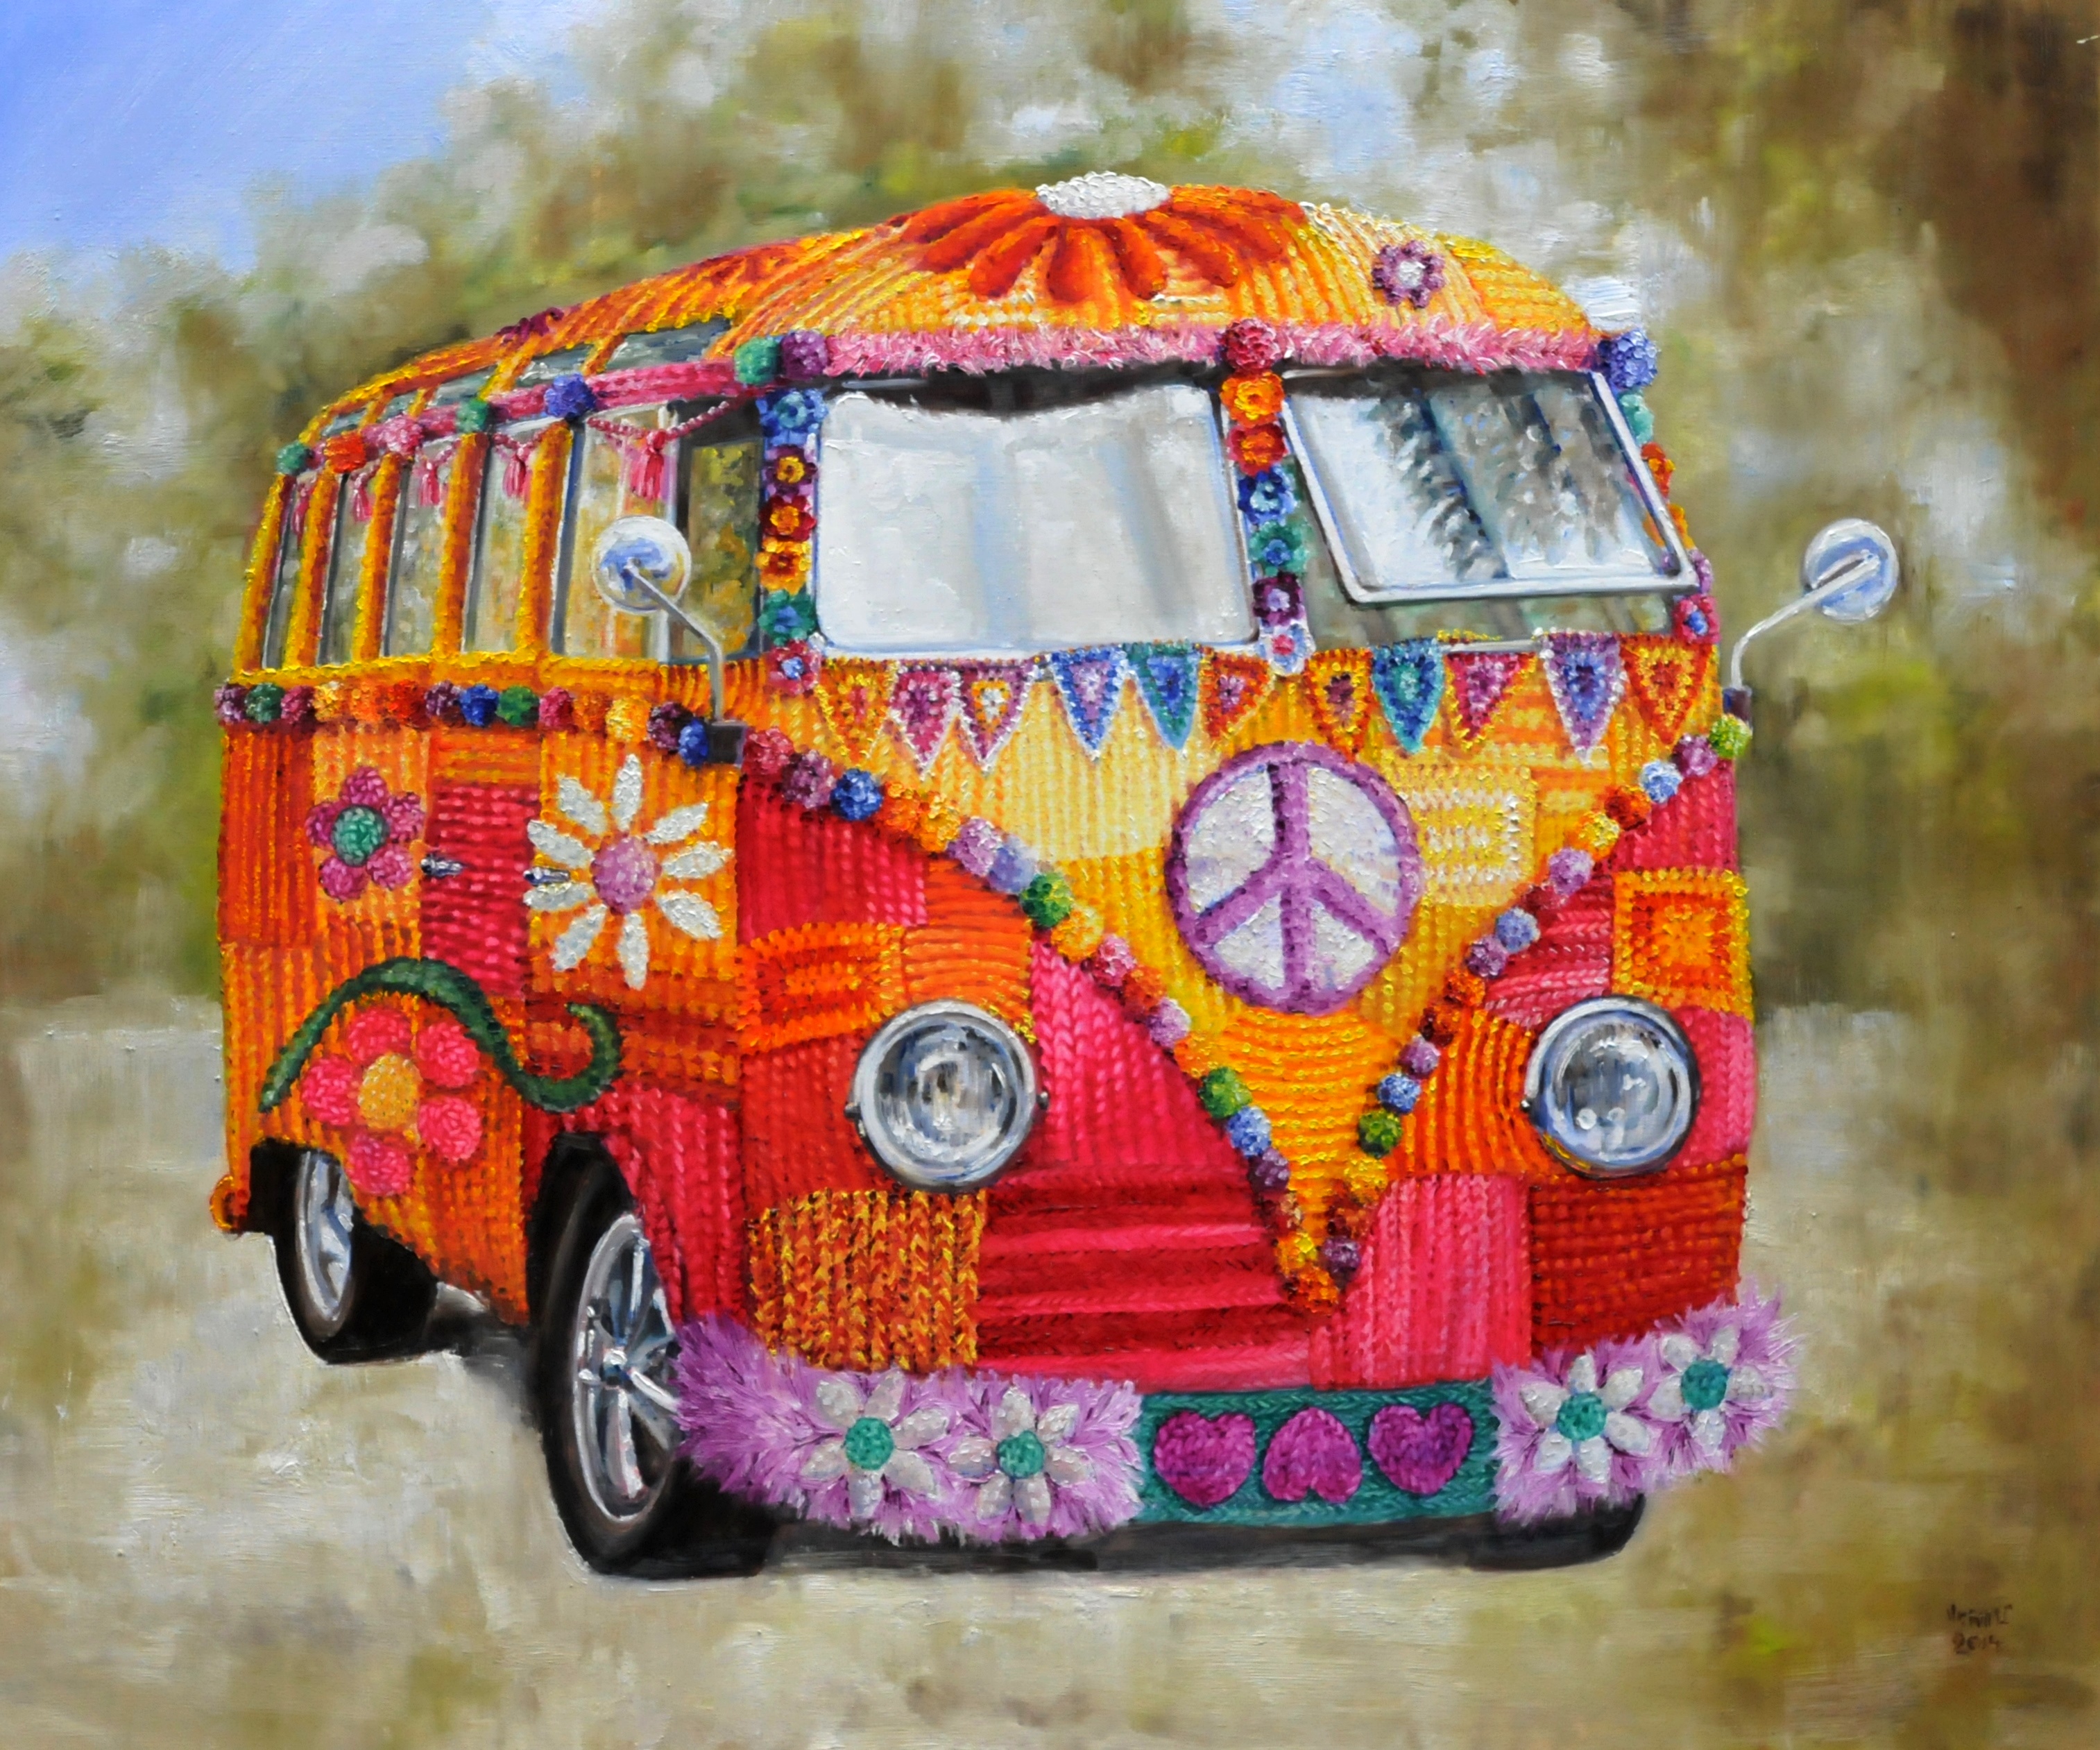 Yarnbombed VW camper | Oil paint on linen | Year: 2014 | Dimensions: 100x120cm